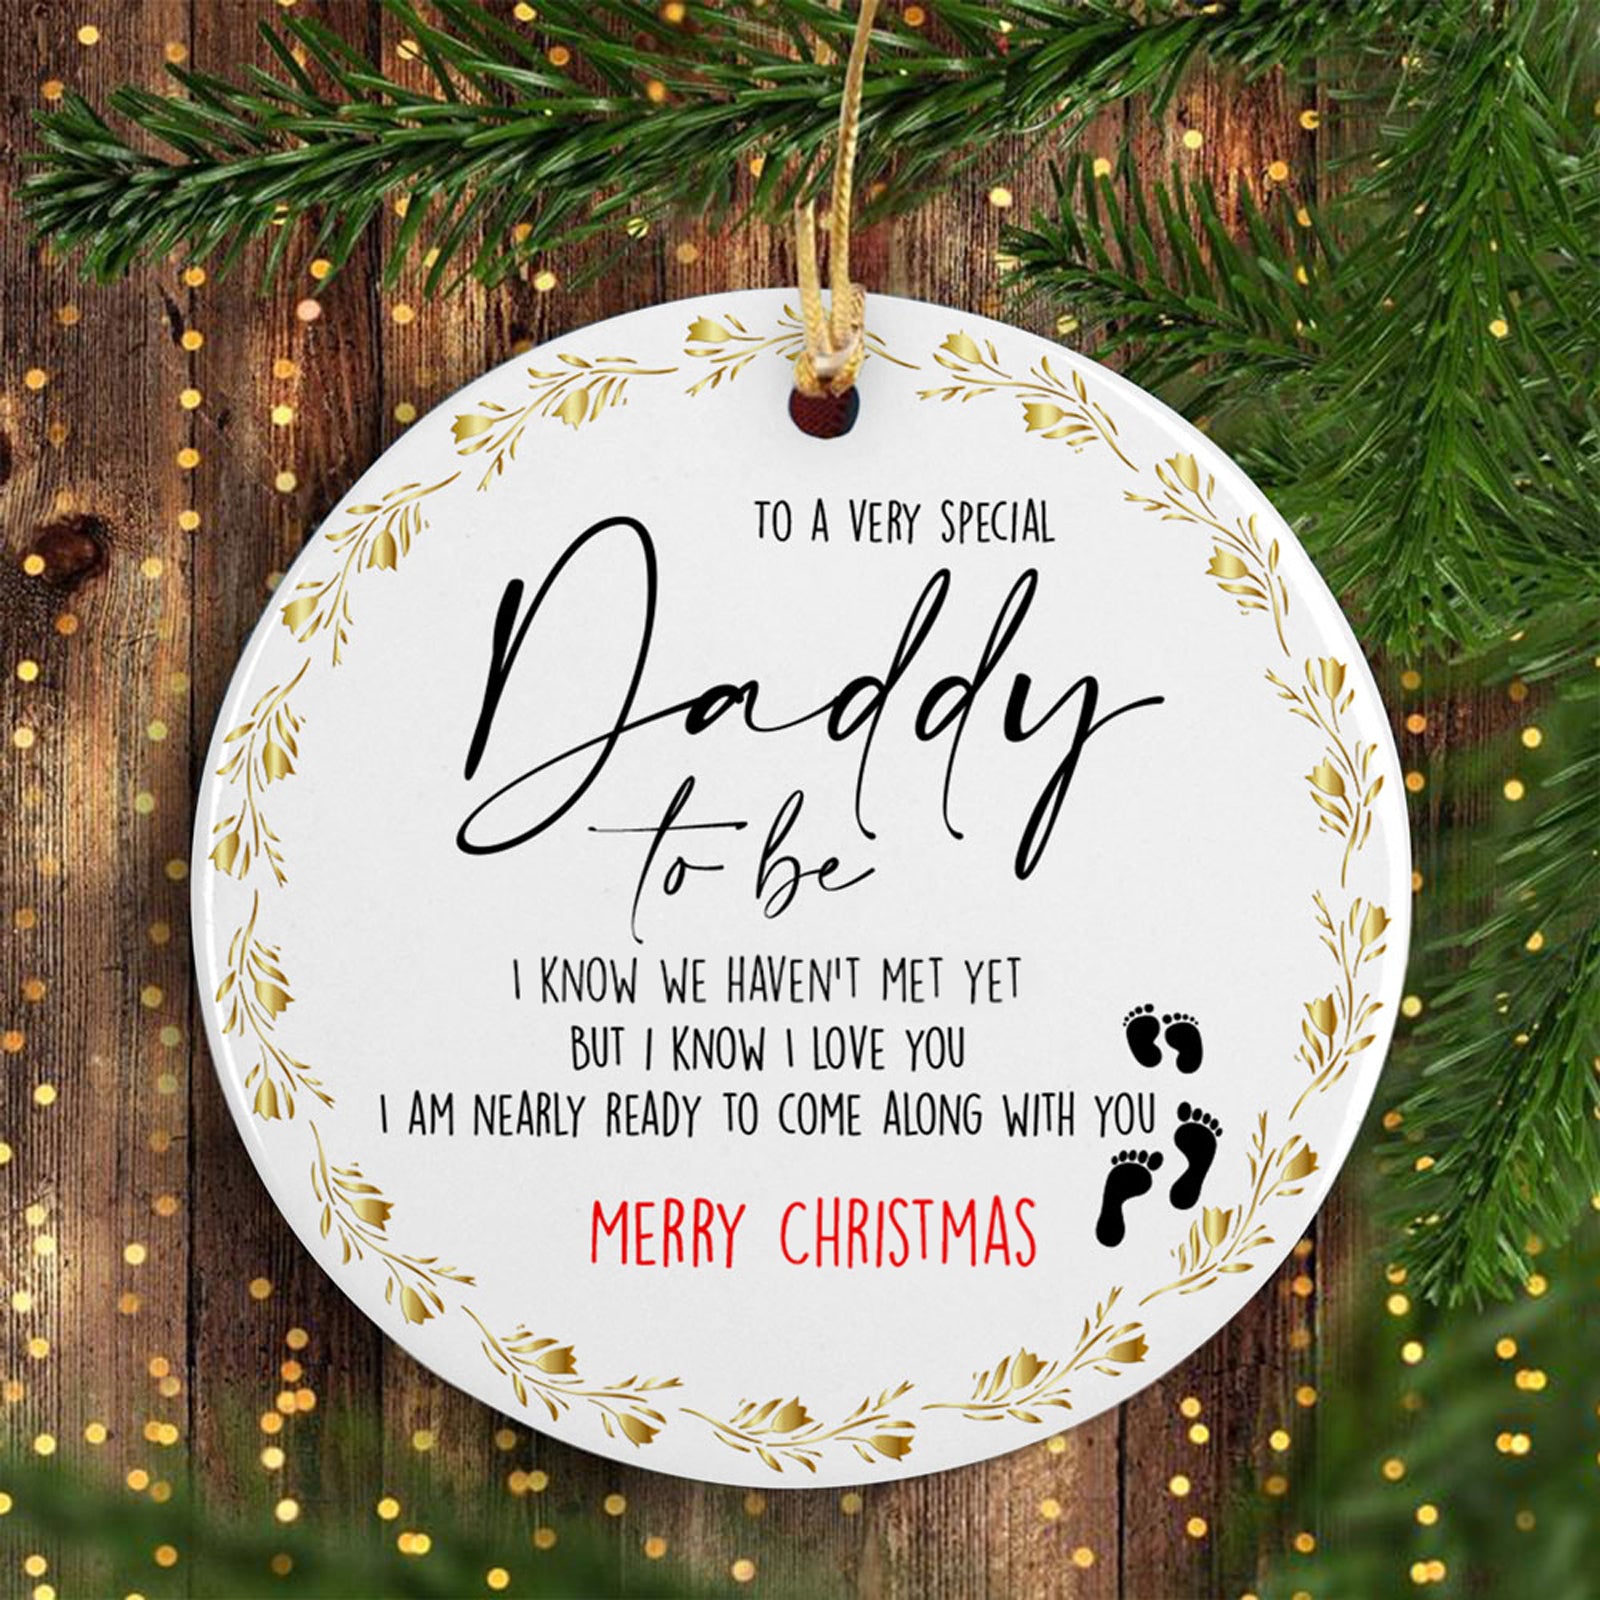 57544-Christmas Gift For Dad To Be I Know We Haven't Met Yet, To A Very Special Daddy To Be Ornament H0